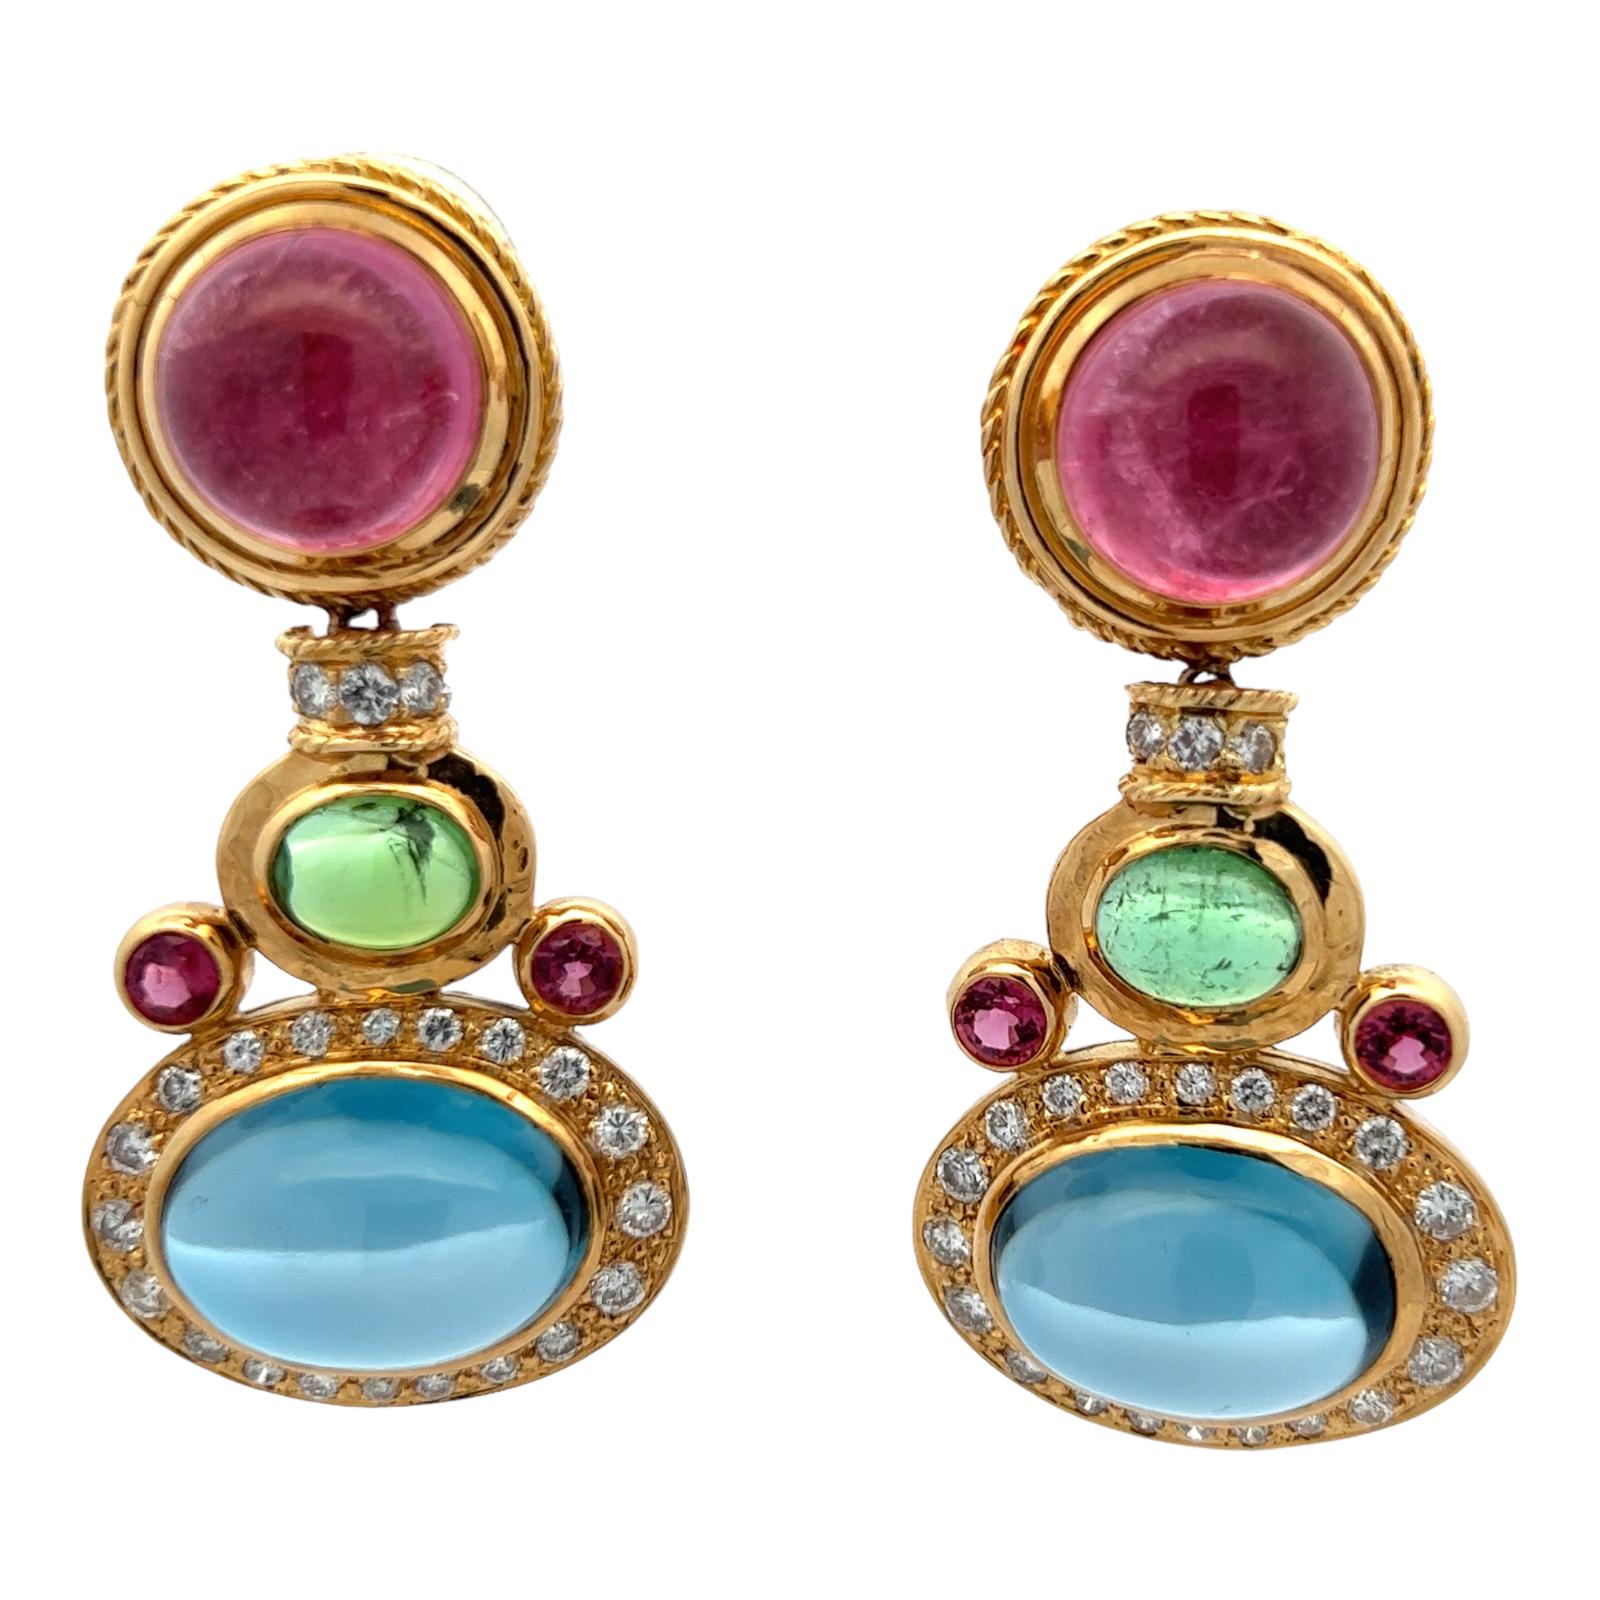 Stunning diamond and cabochon gemstone drop earrings handcrafted in 18 karat yellow gold. The earrings feature round brilliant cut diamonds weighing approximately 2.00 CTW and graded G-H color and VS2-SI1 clarity. Cabochon pink and green tourmaline,